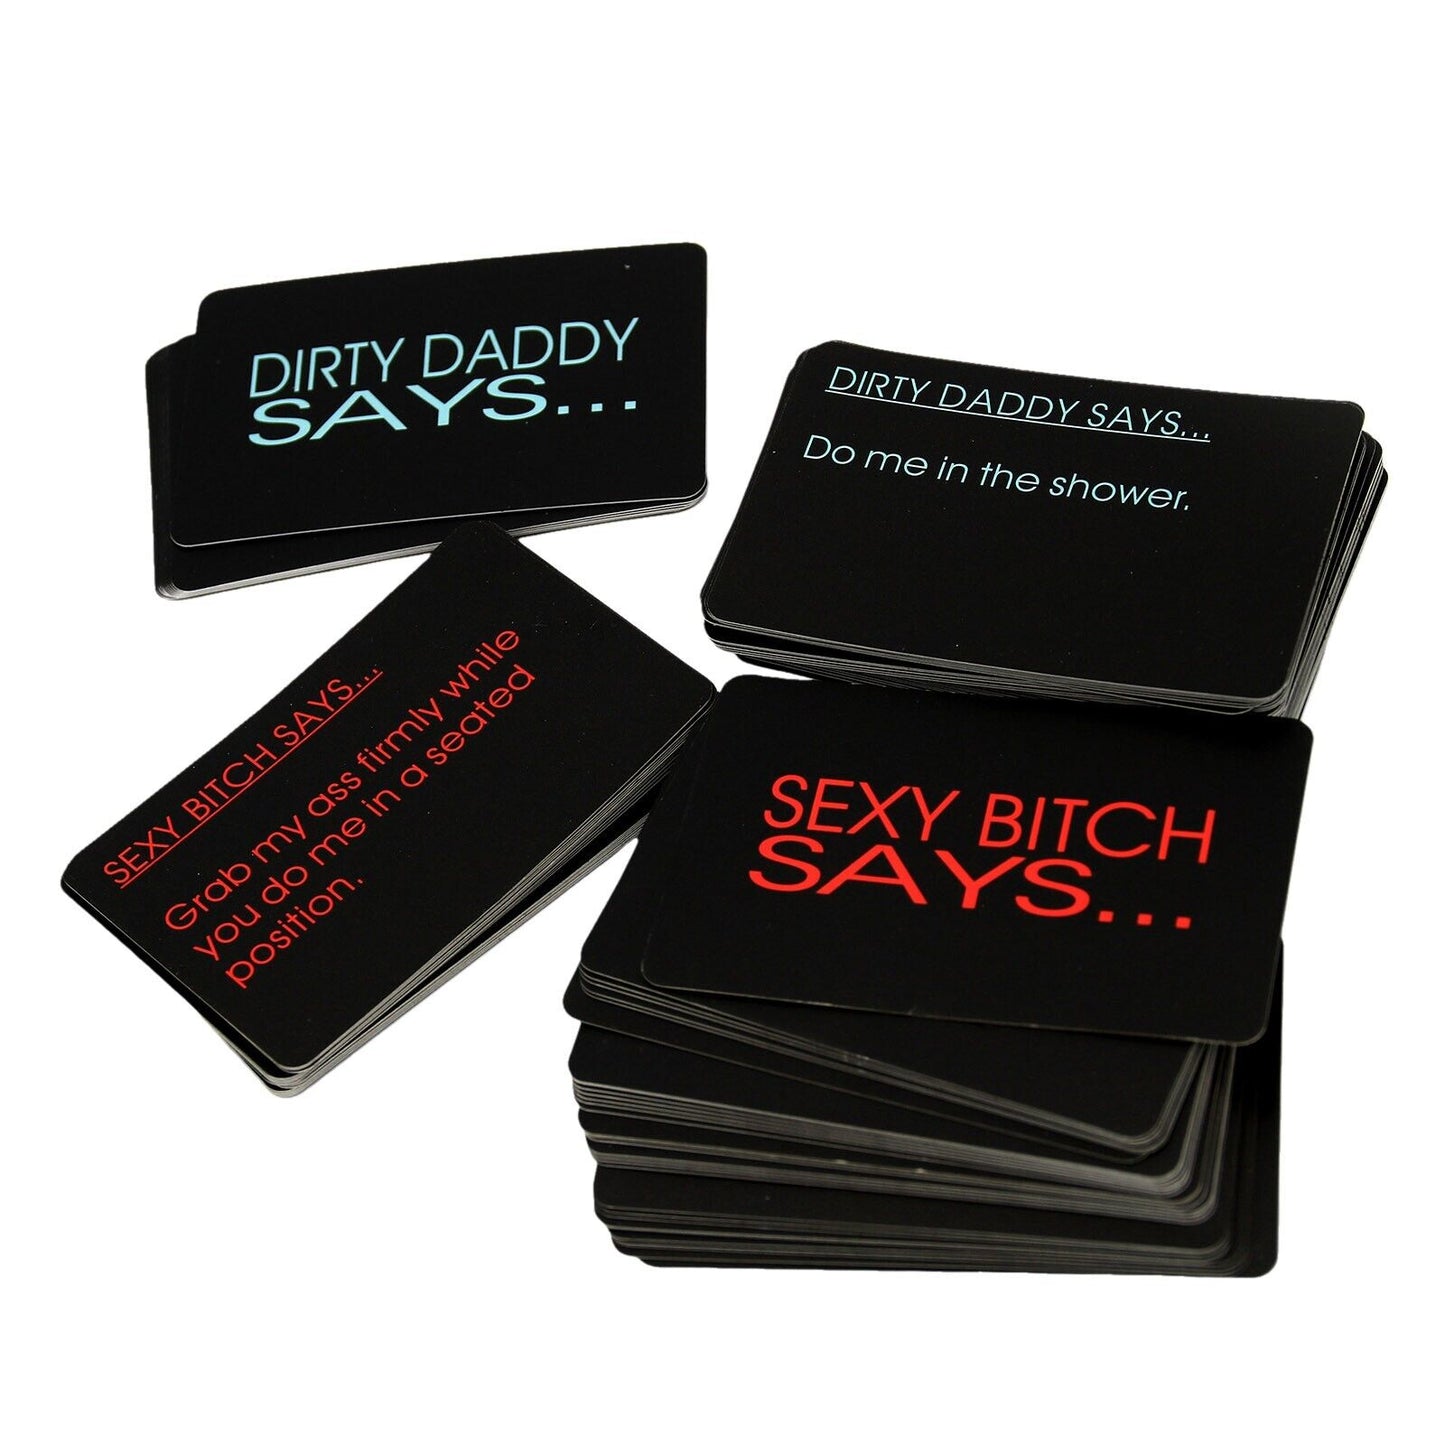 Card Game for Adult Couples in Bedroom on Naughty Nights